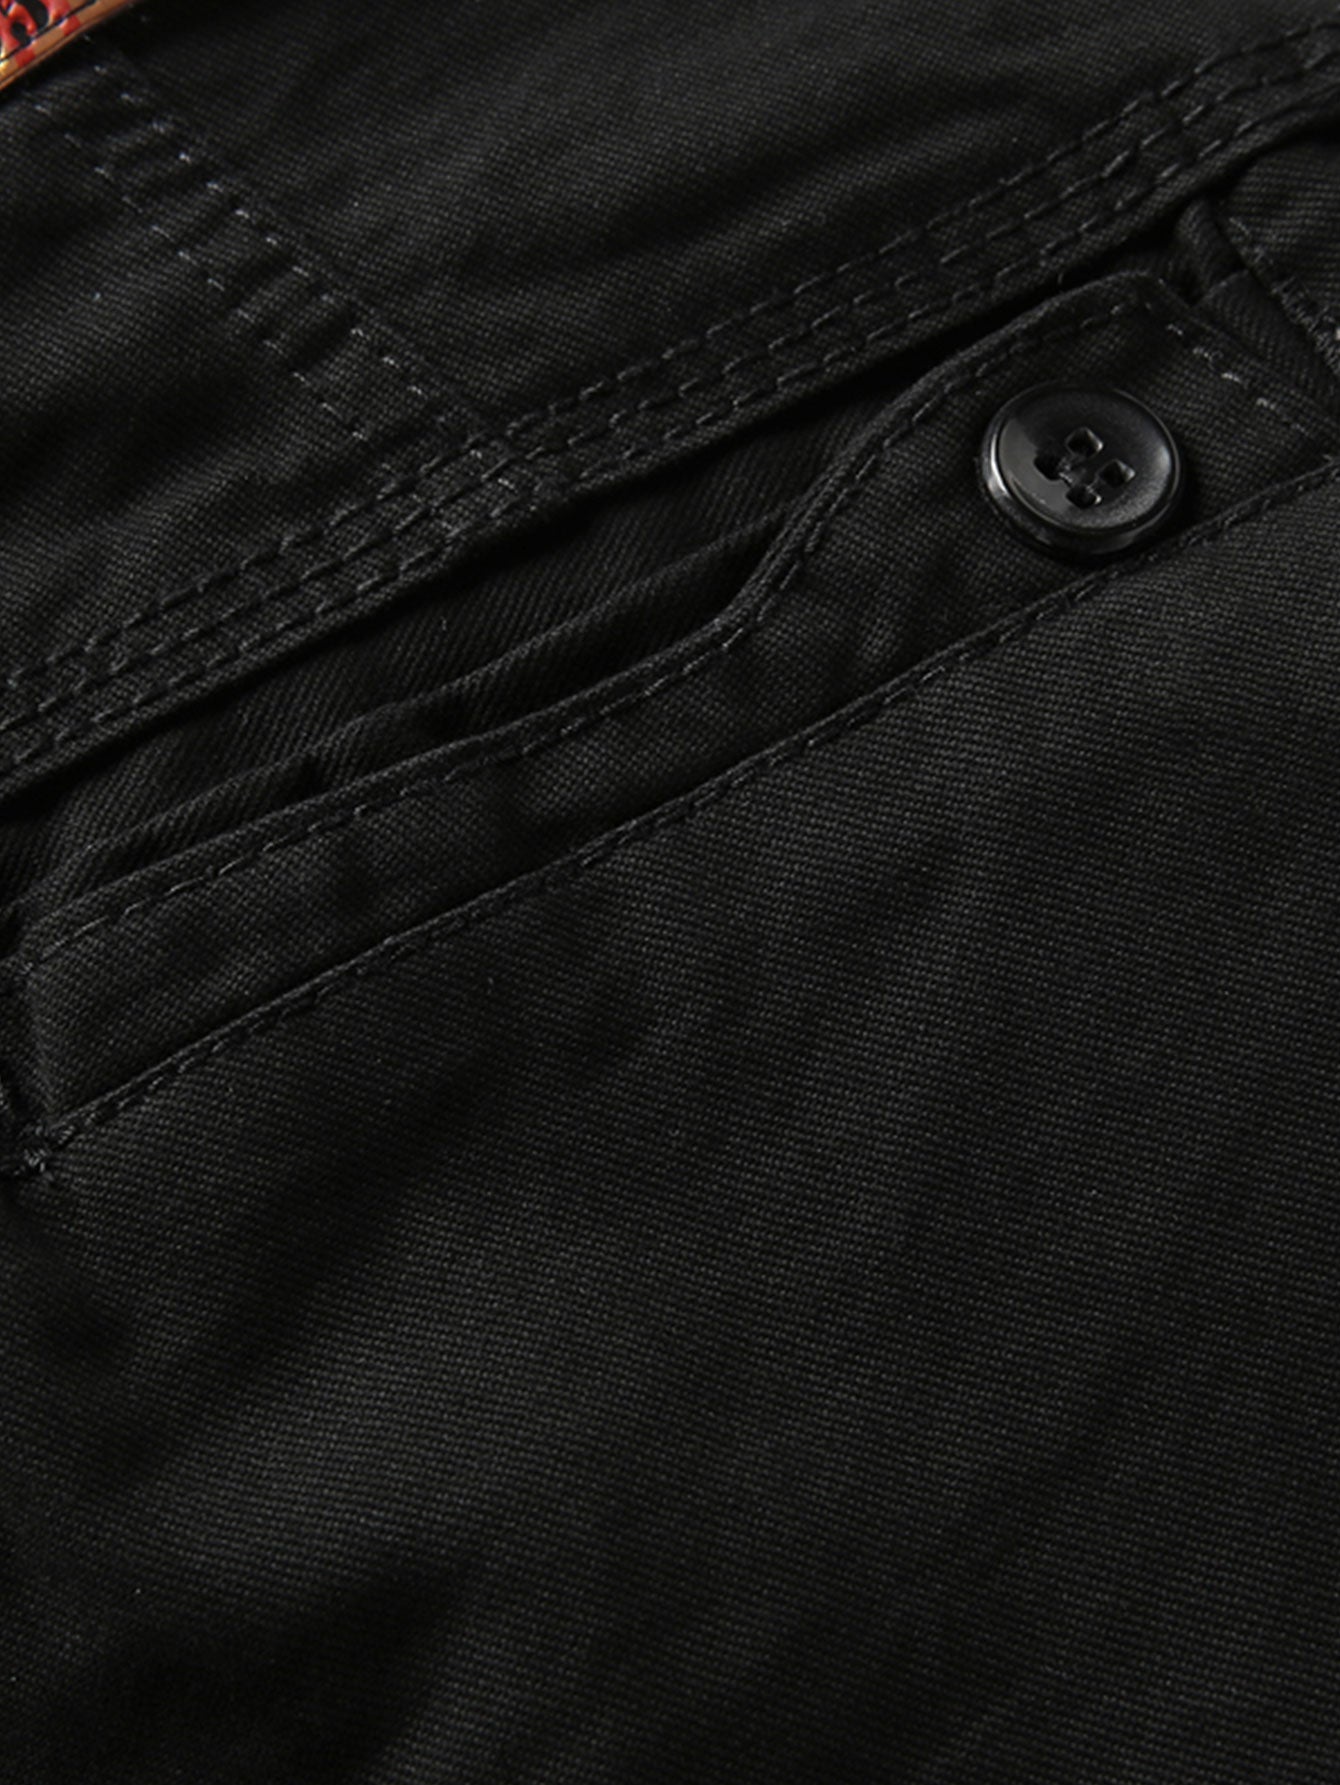 Chino Shorts with Stud Pockets for Men